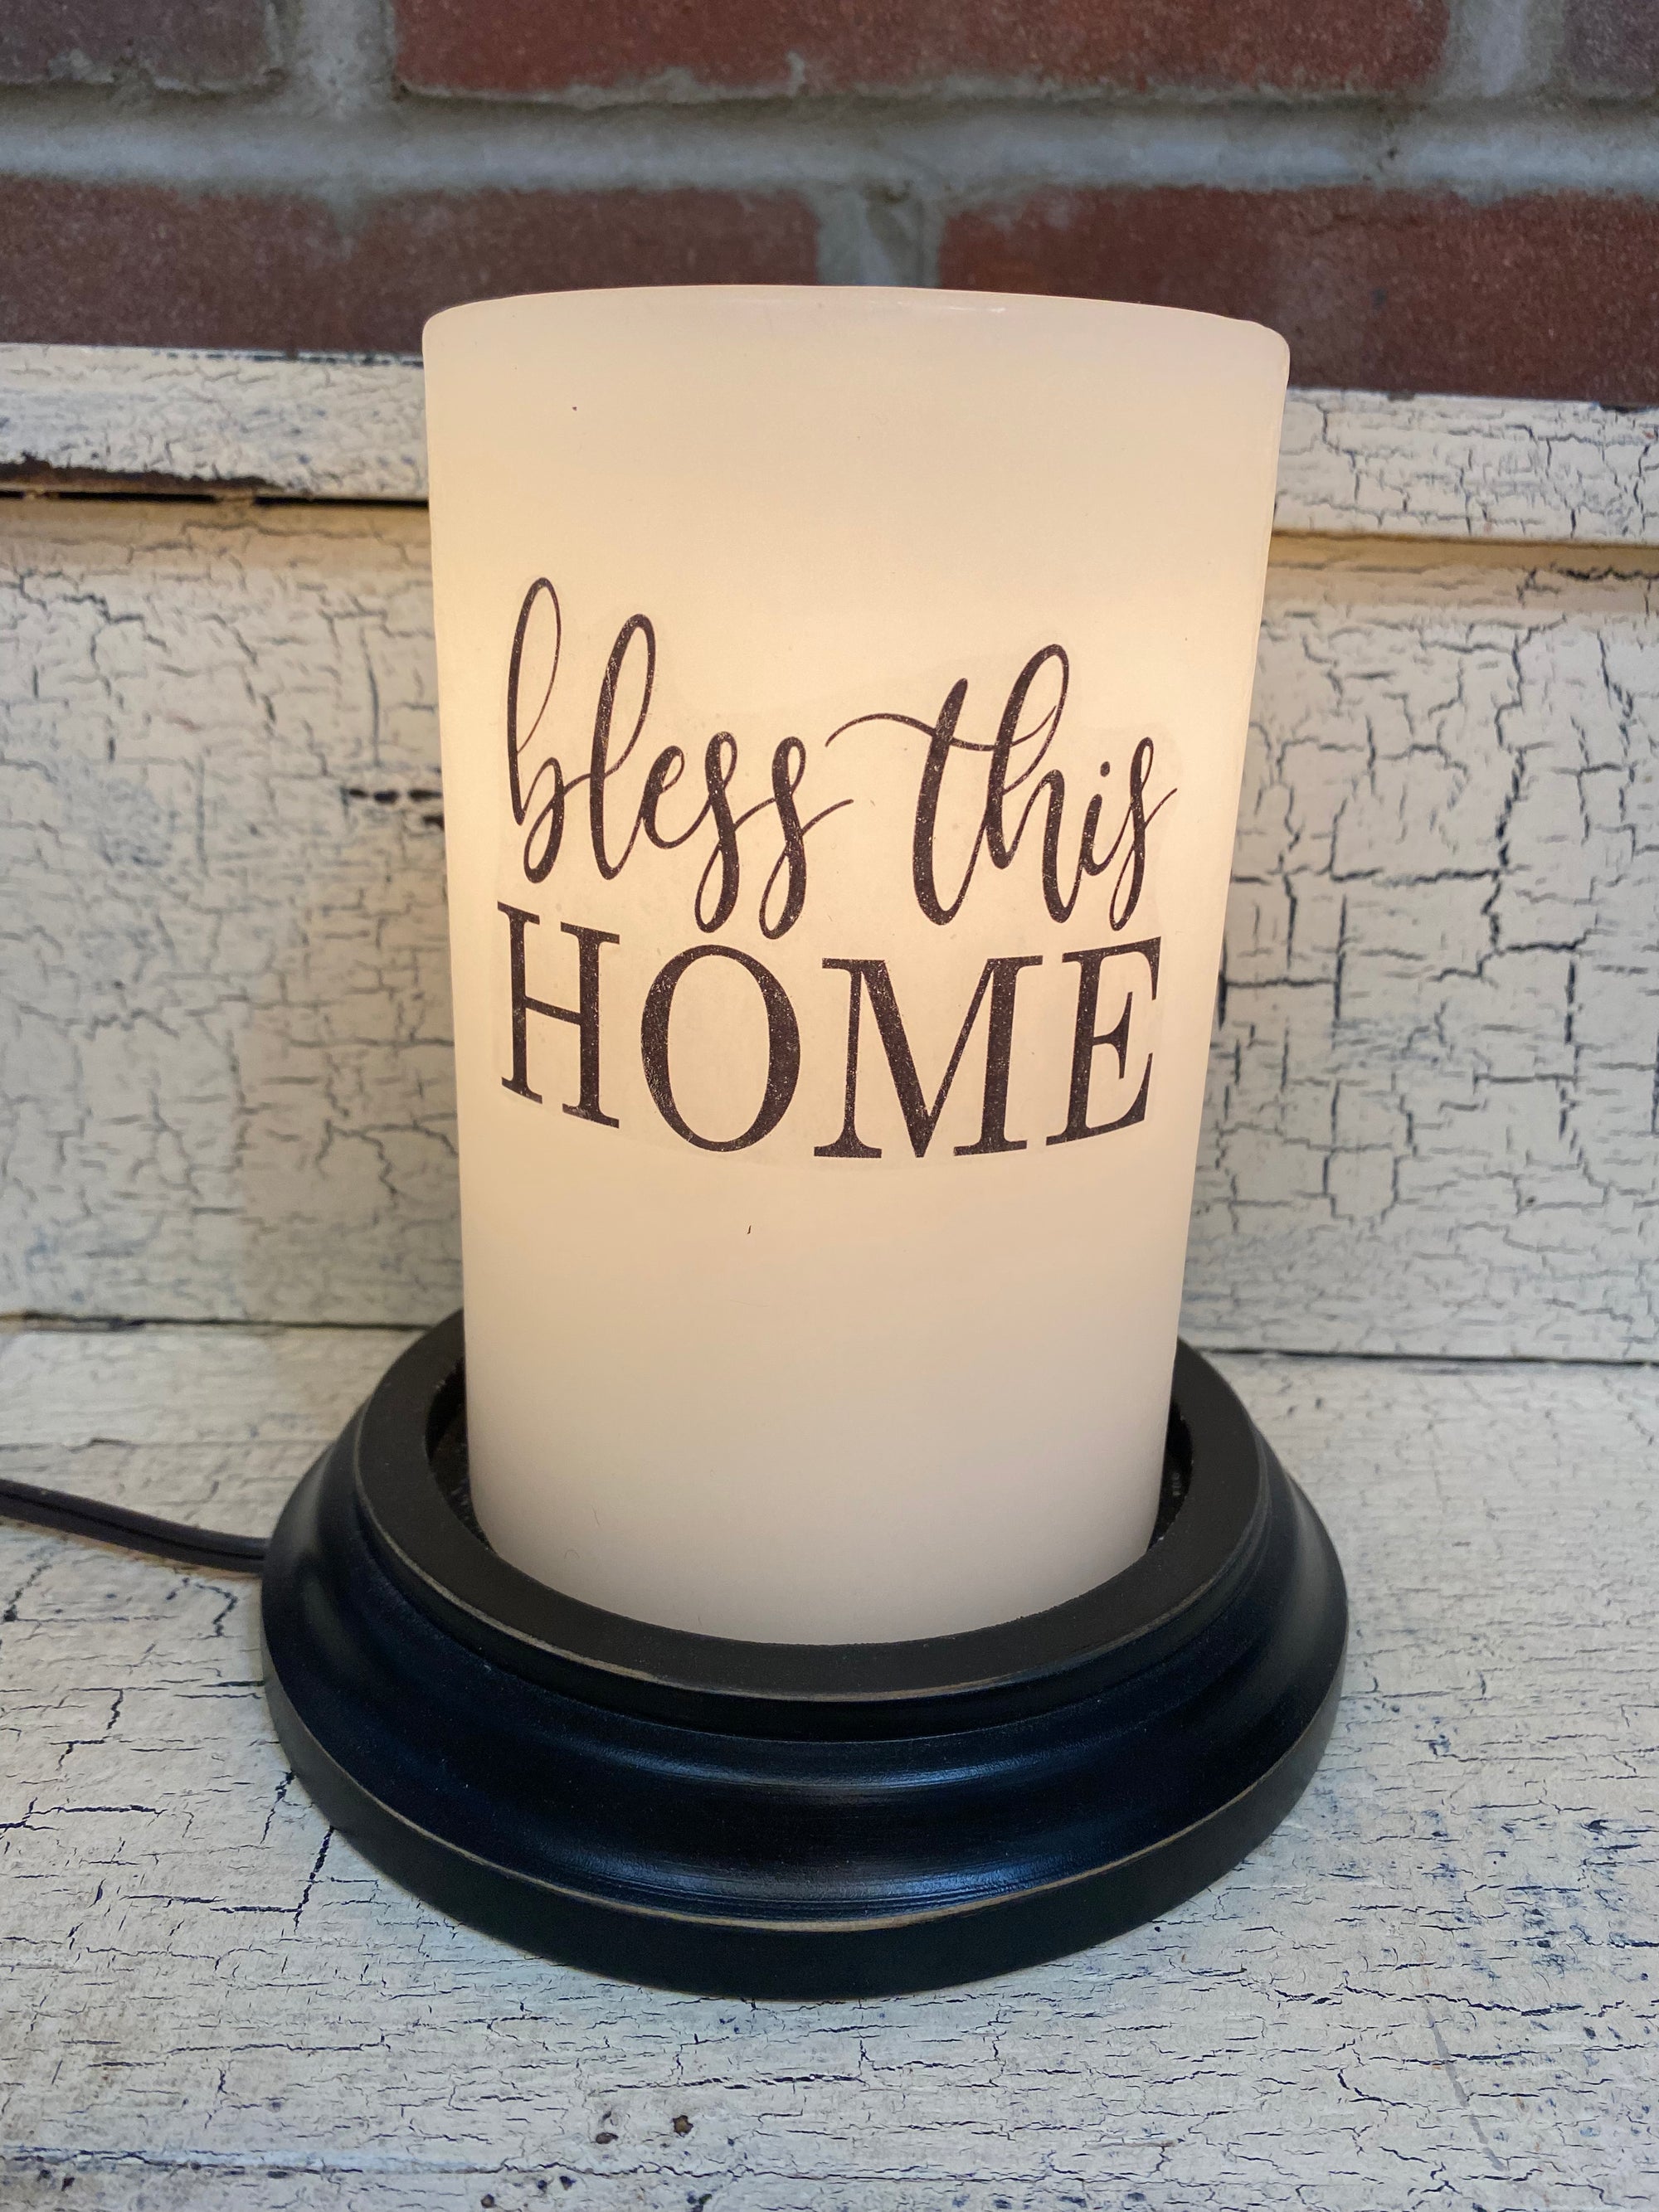 Bless this Home Candle Sleeve